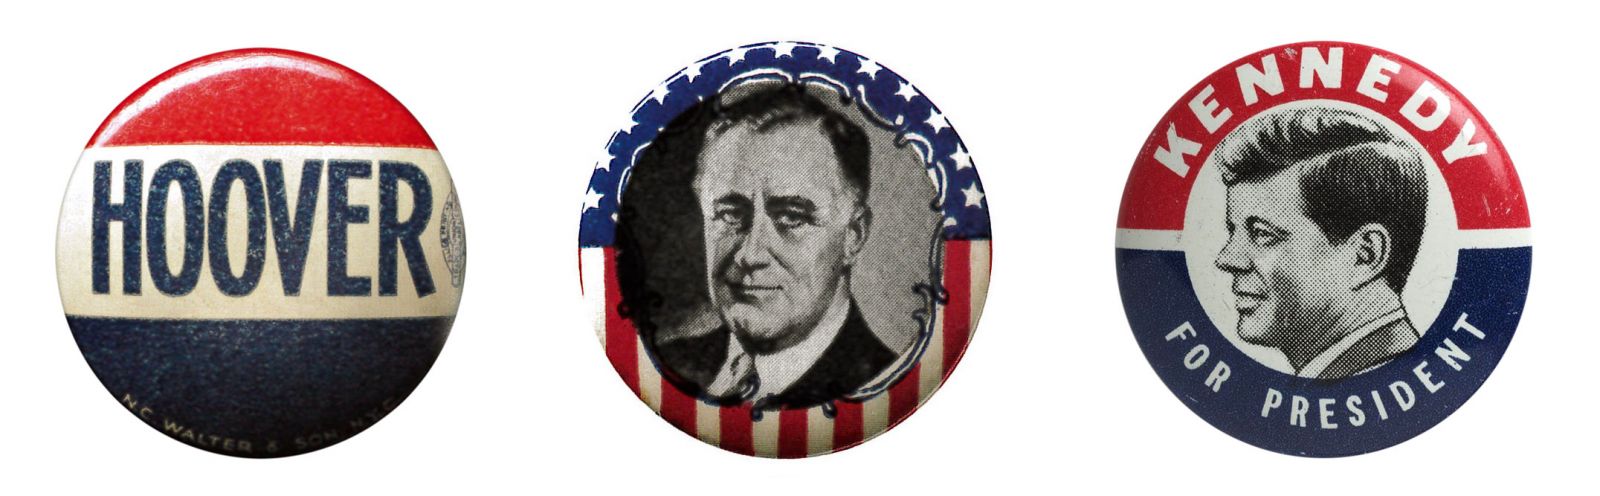 nhl presidential campaign buttons for the winter classic